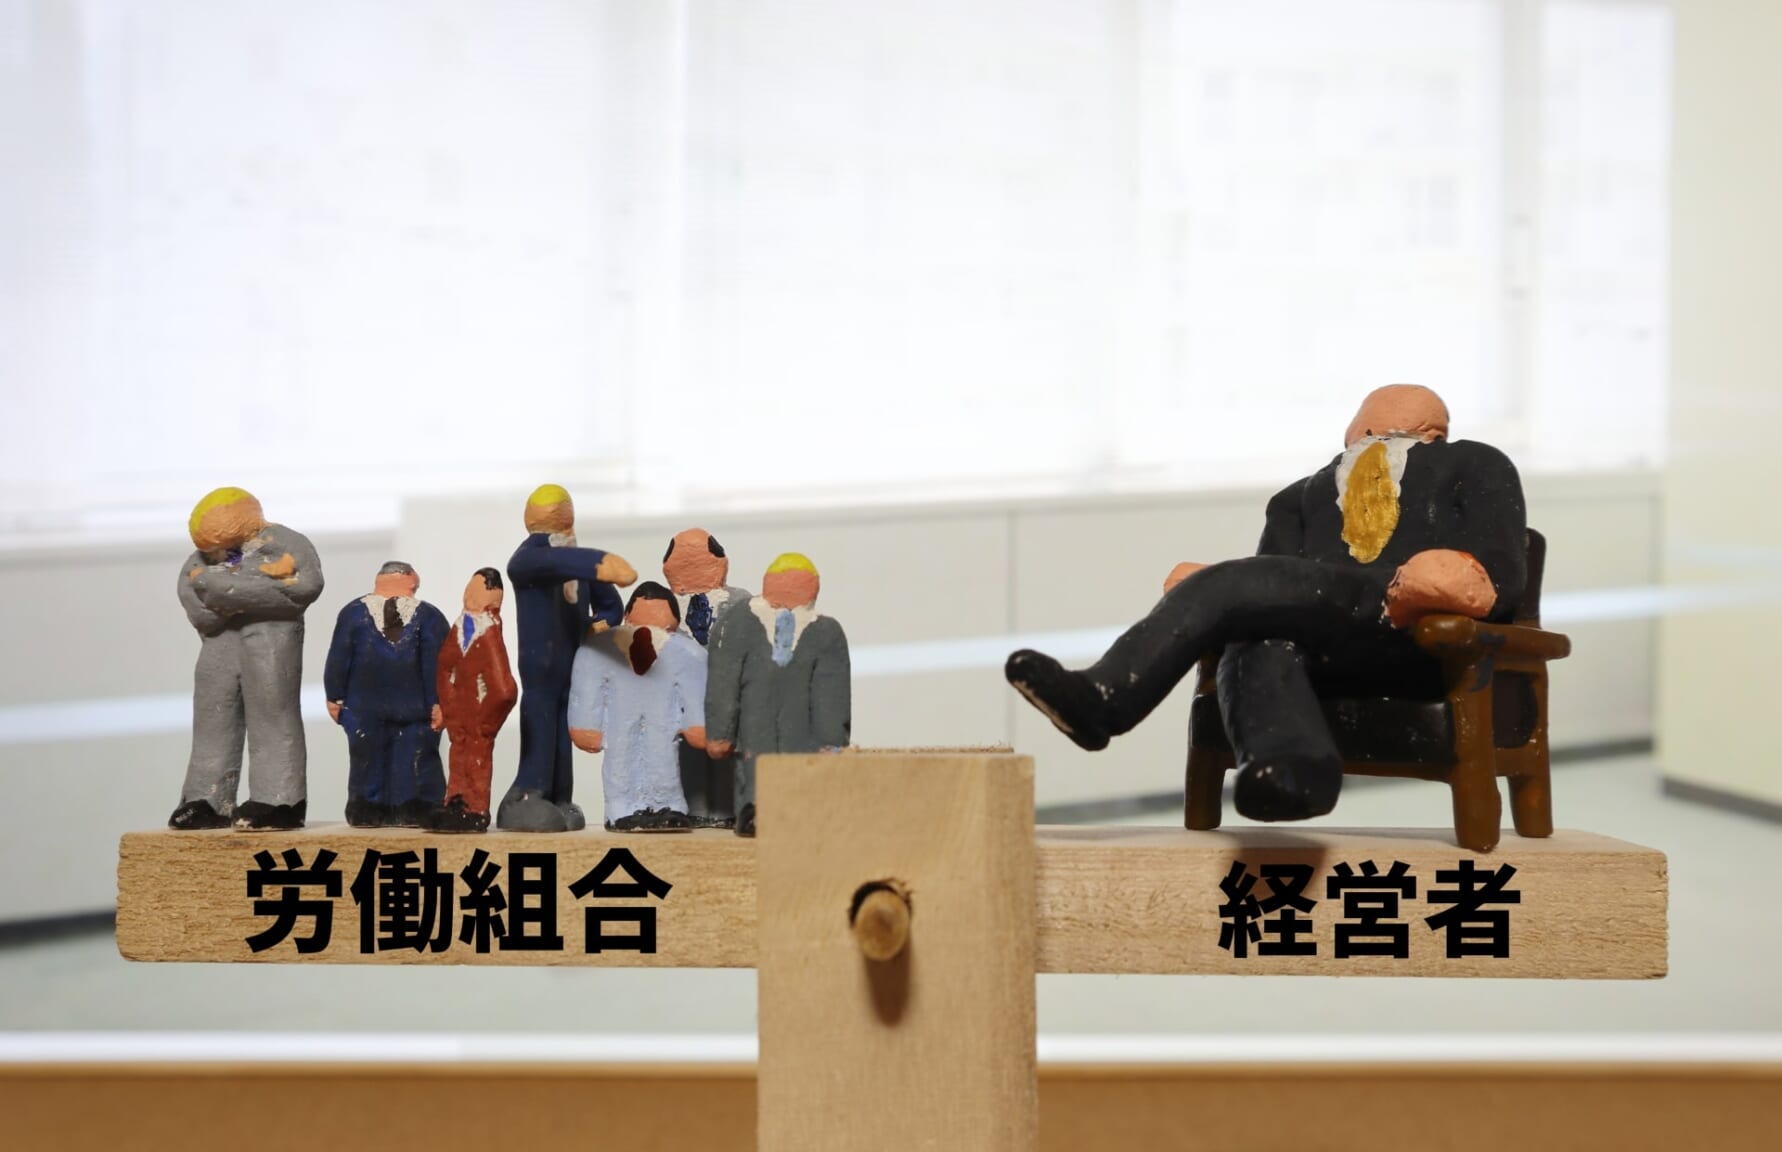 Figurines depicting worker unions against company executives in Japan